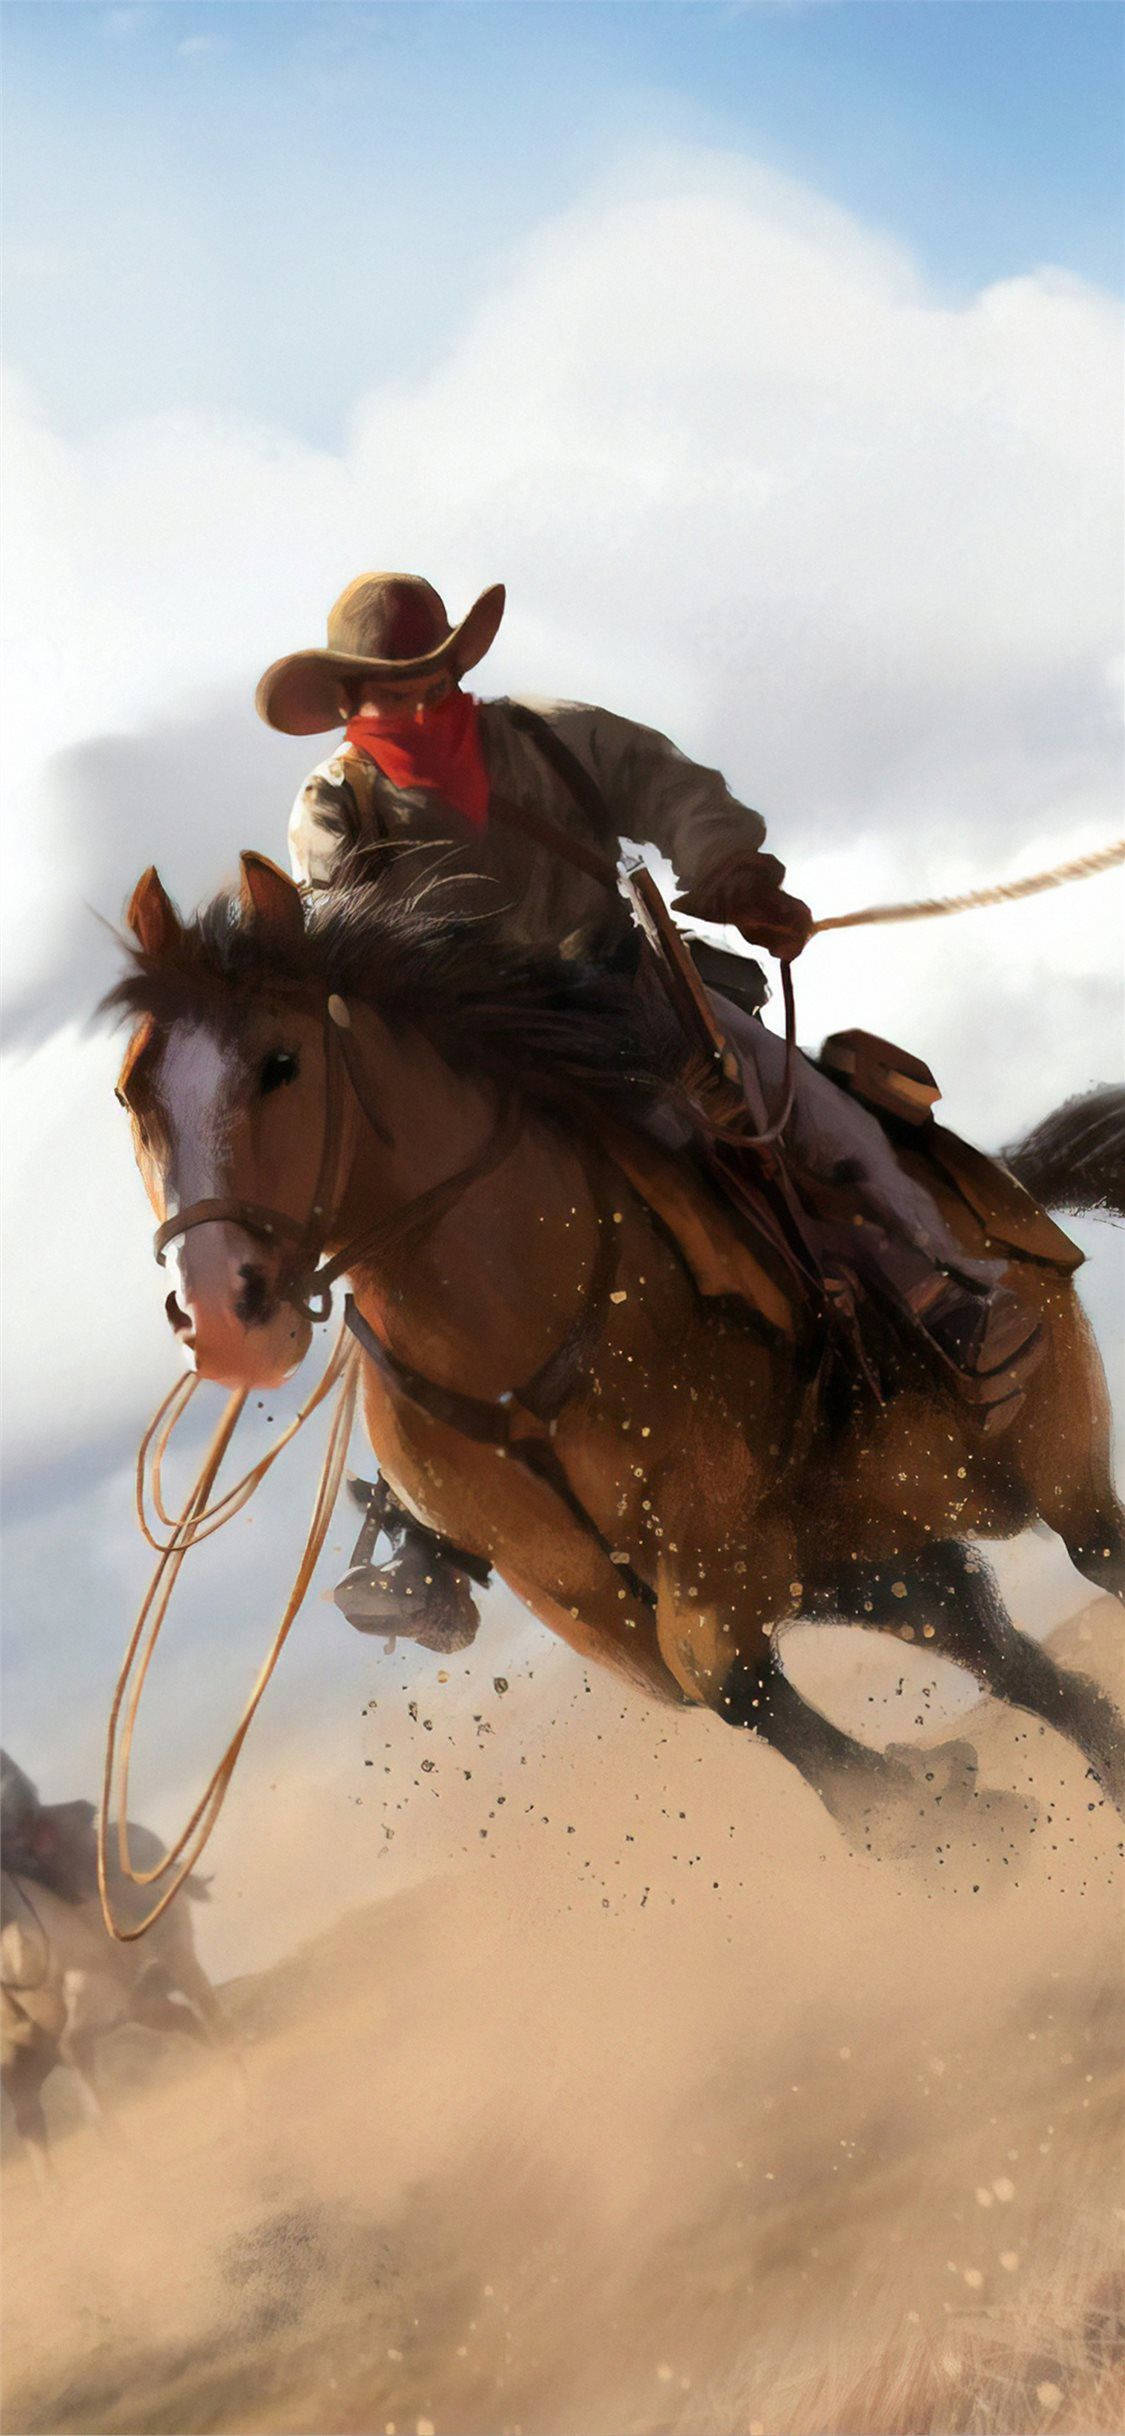 Red Dead Iphone Galloping Horse Wallpaper